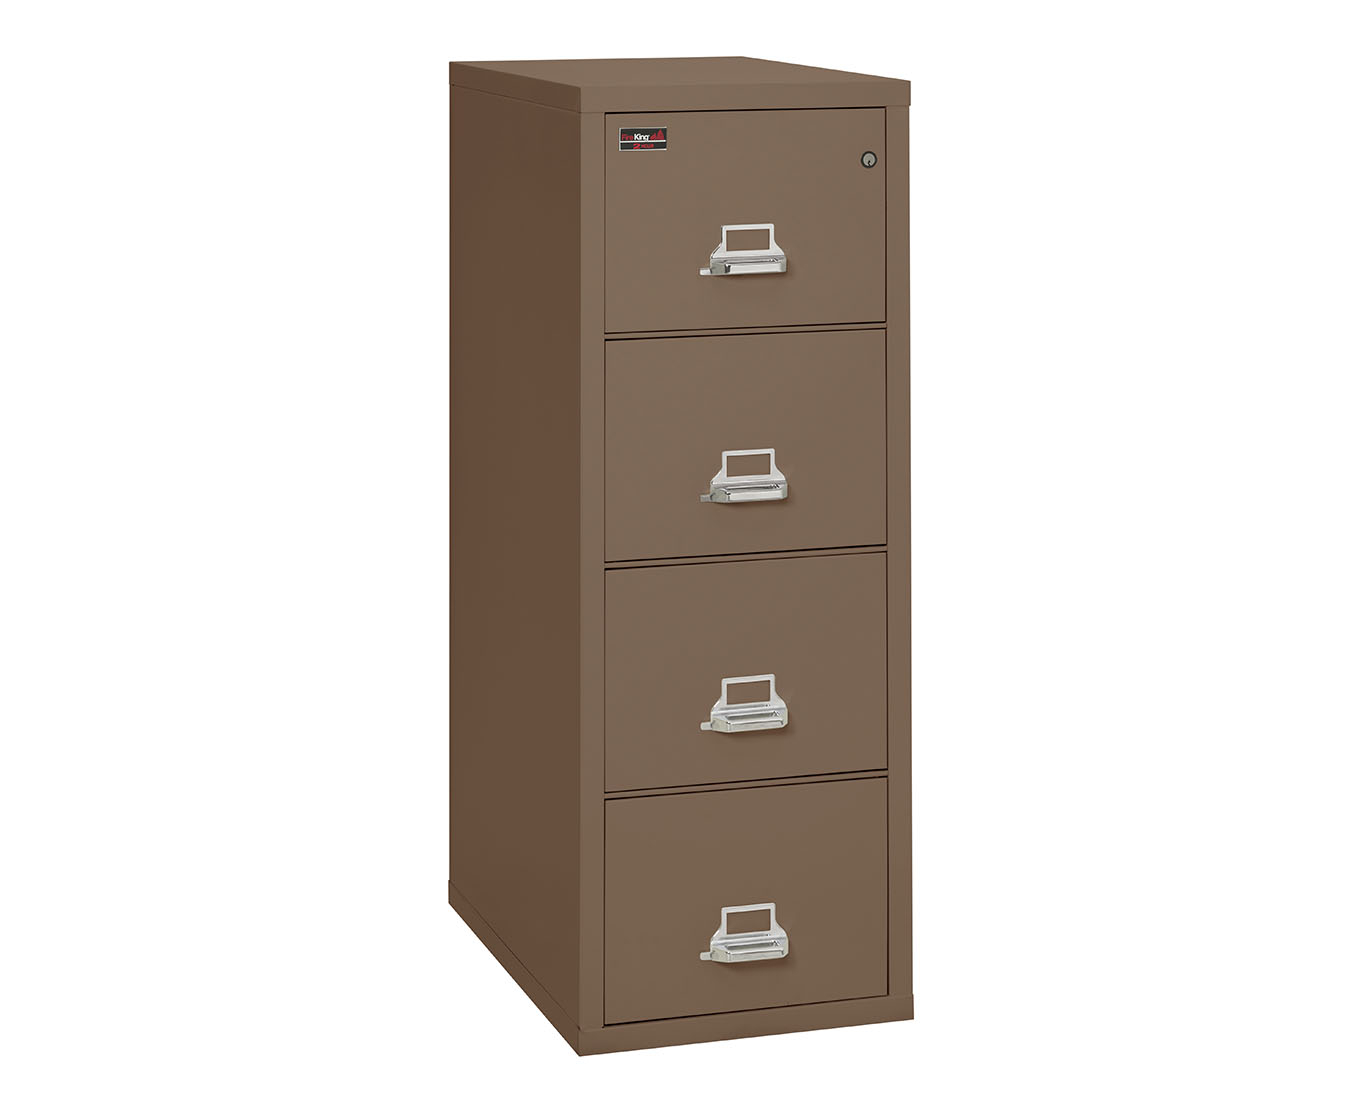 Fireproof File Cabinets 2 Hour Rated Fireking inside proportions 1366 X 1110